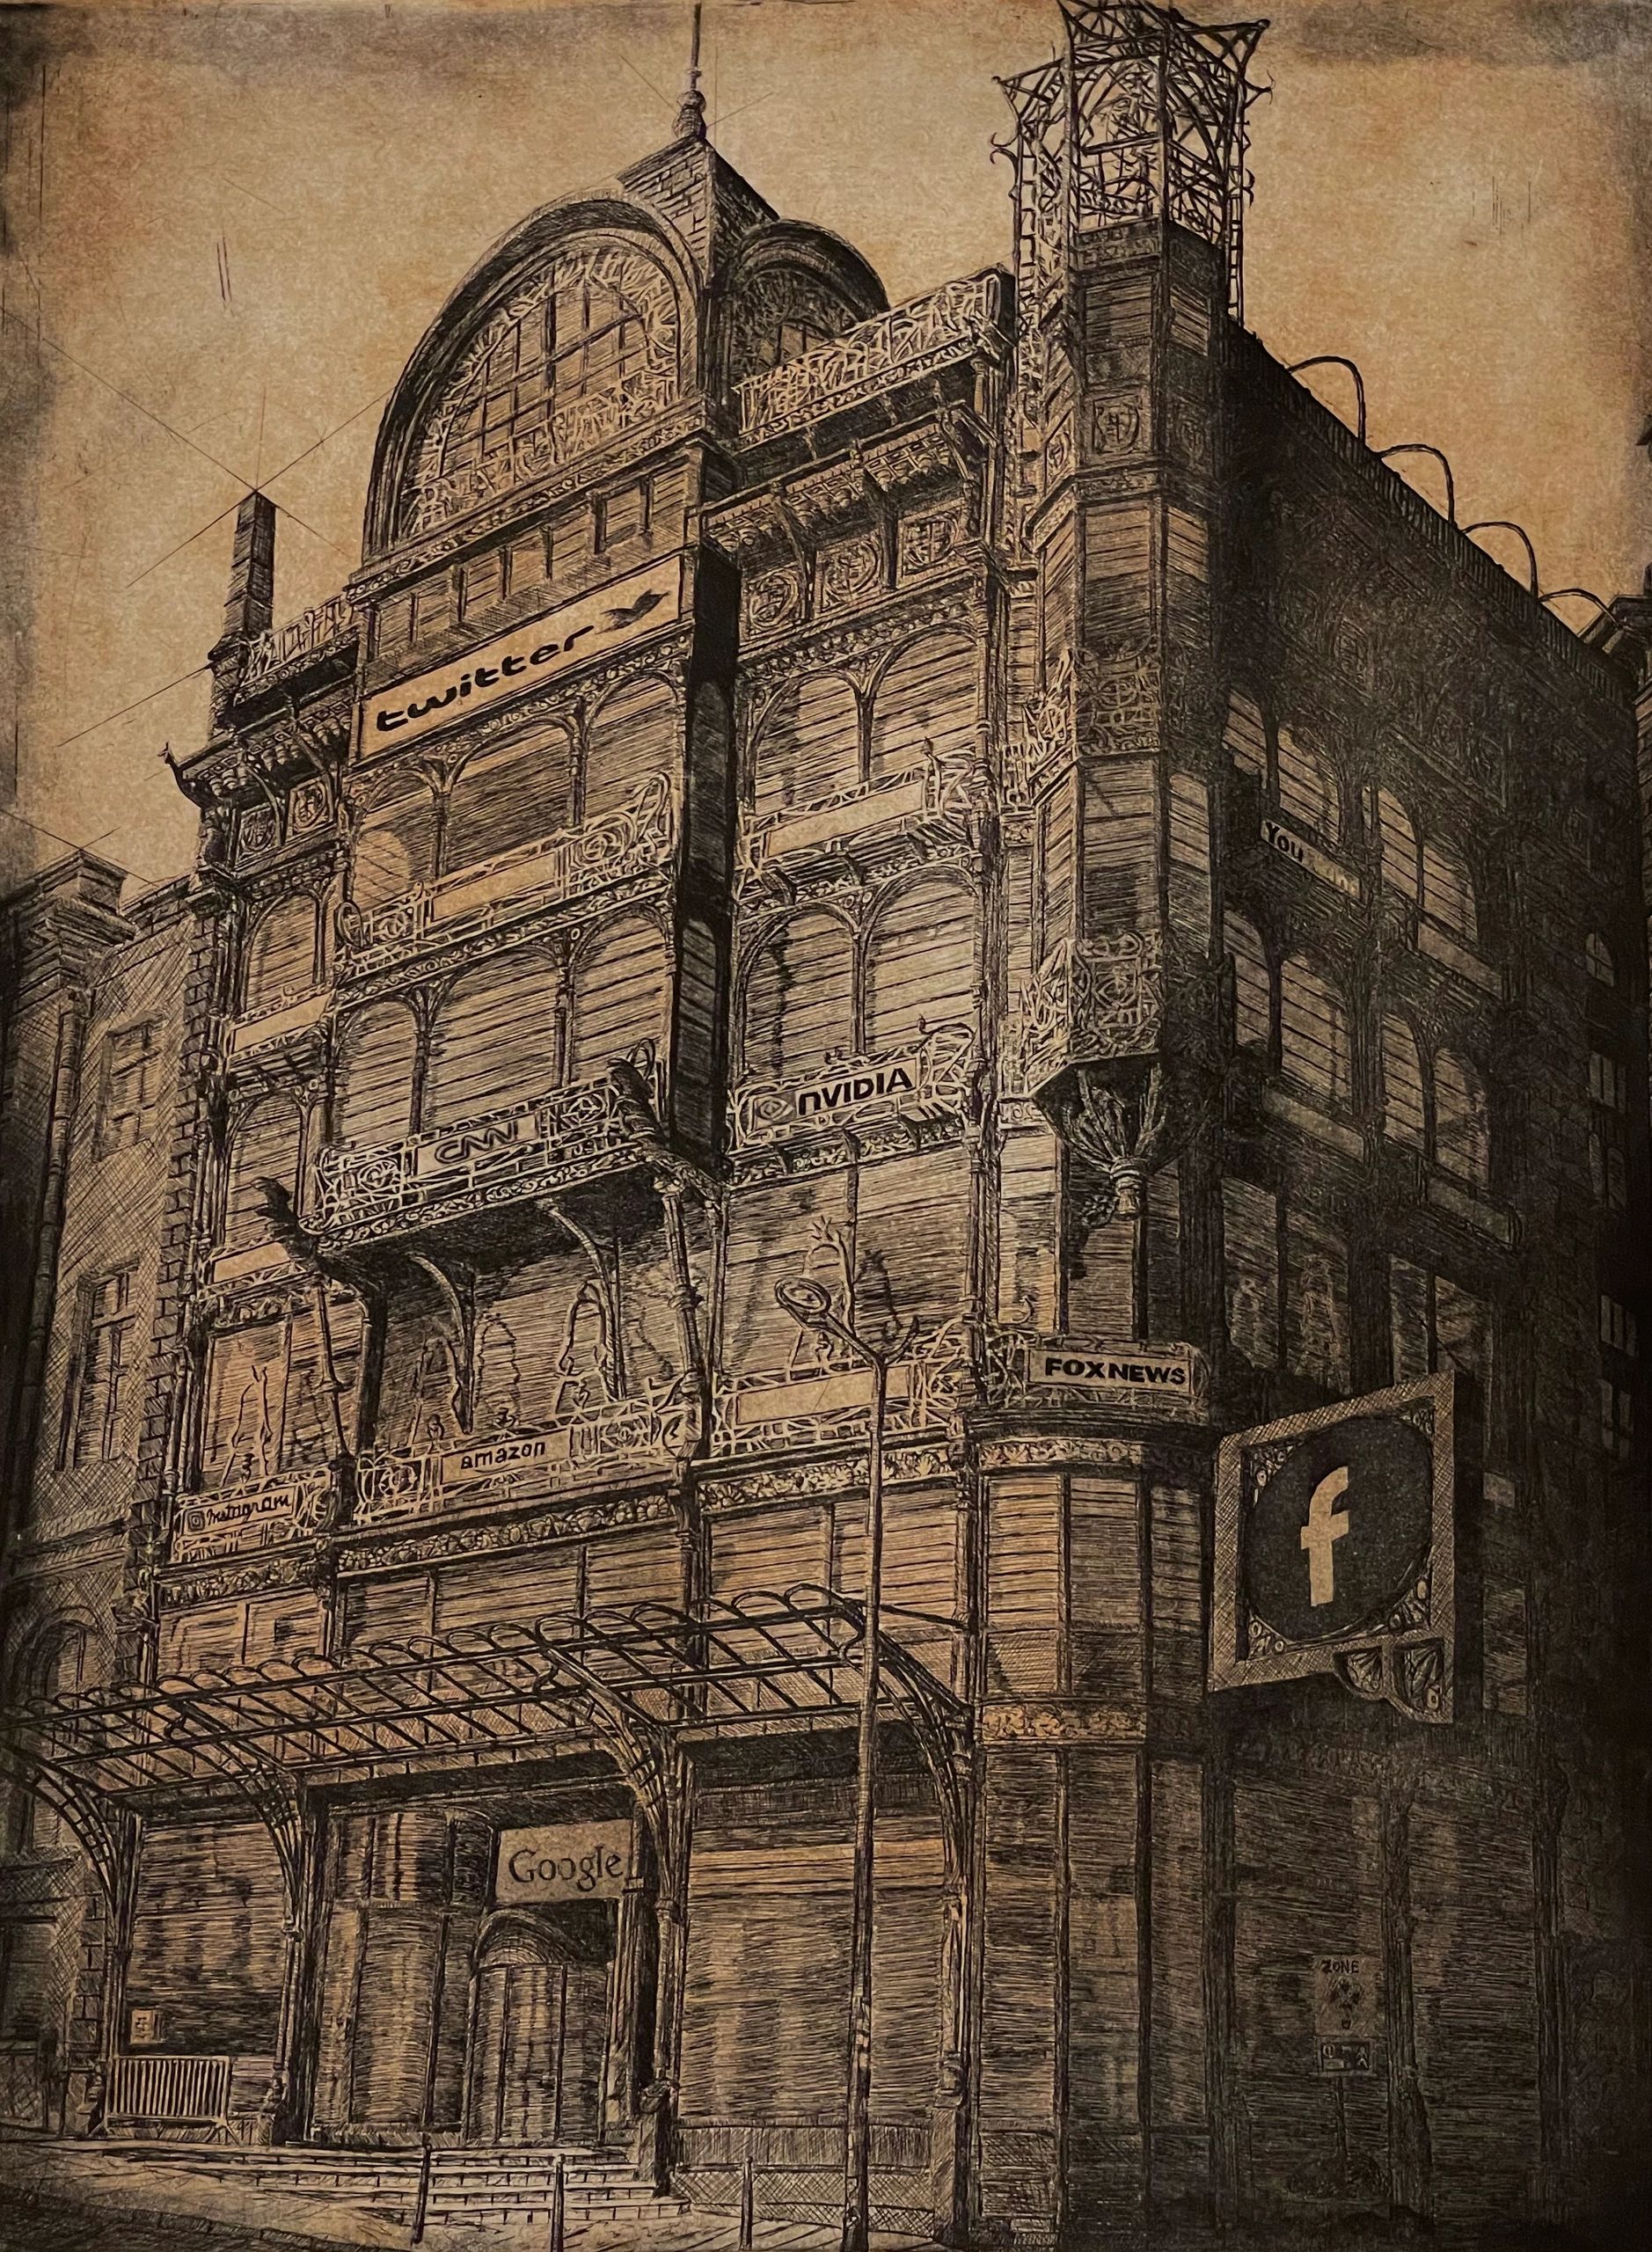 "Disinformation Playhouse", Etching, 24"x18", 2021